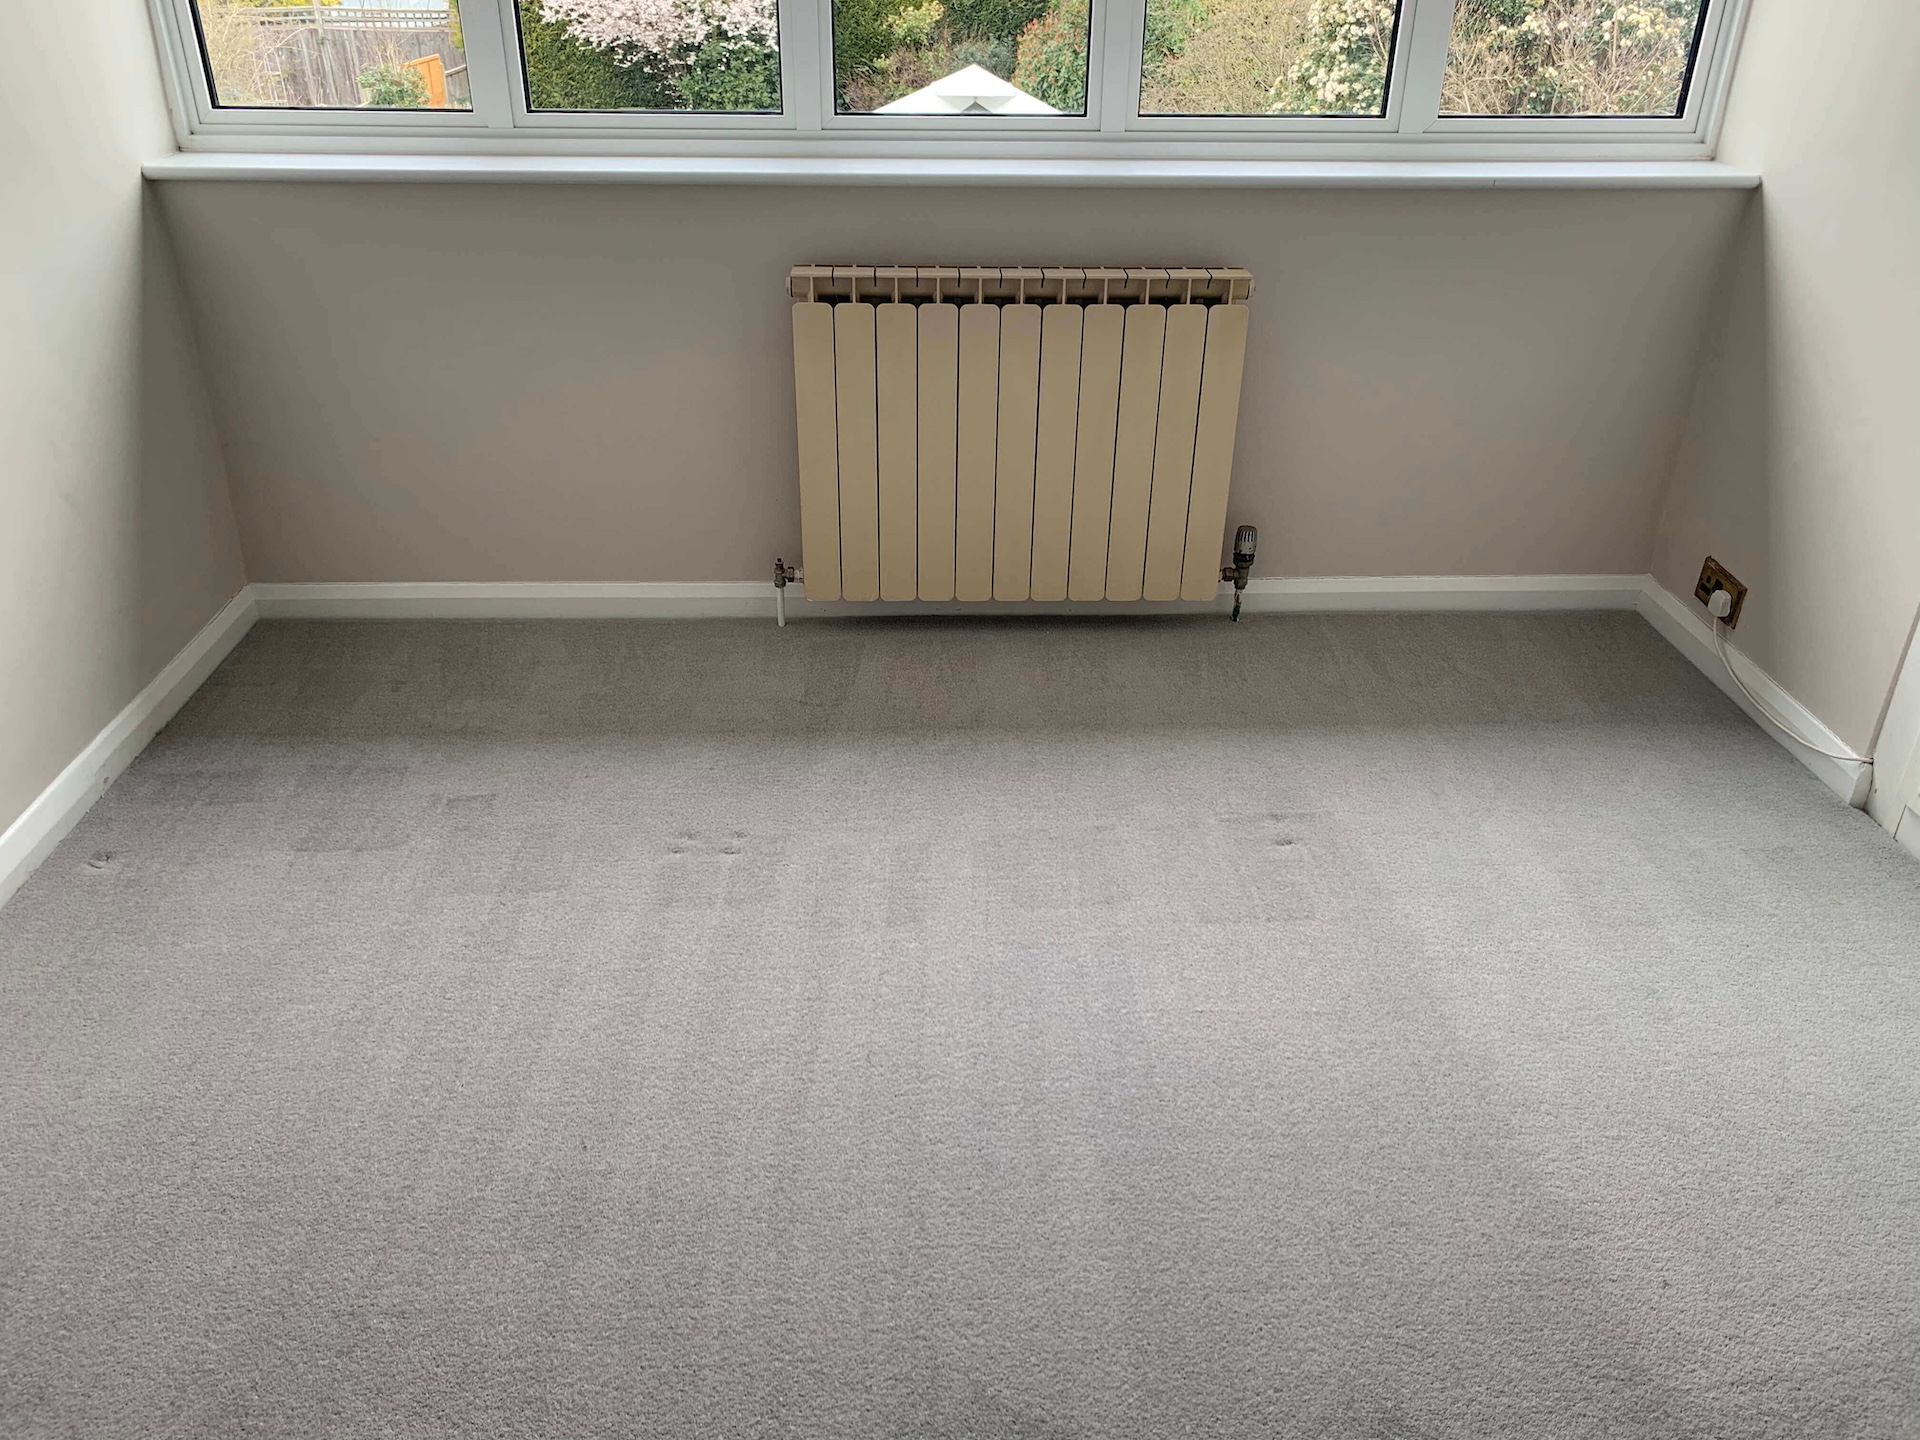 Immaculately cleaned bedroom with a freshly vacuumed carpet in Ealing W5, showcasing the effectiveness of Cleaningsure's after tenancy cleaning services for a welcoming and dust-free environment.